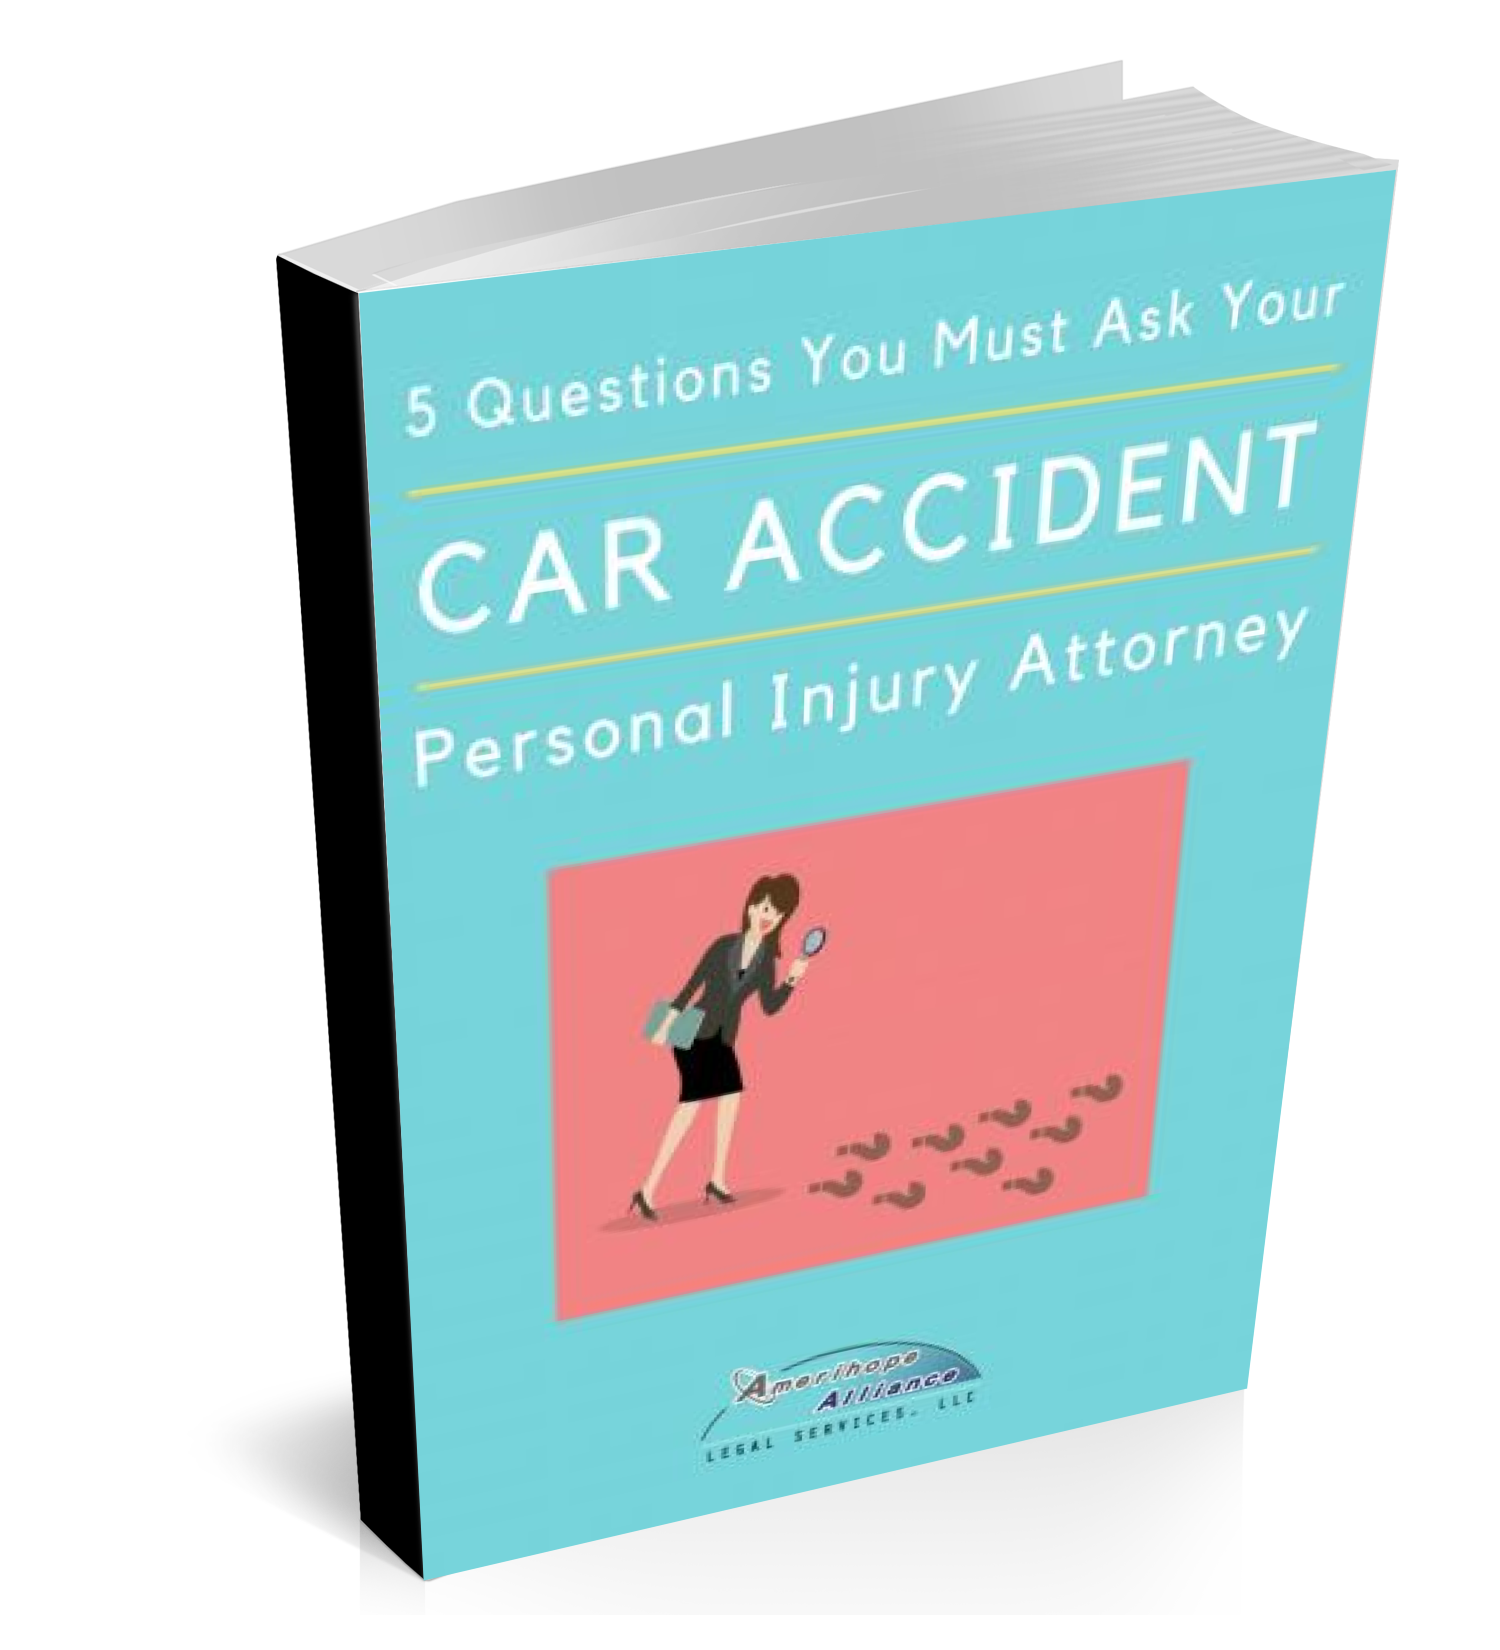 Download Free E-Book '5 Questions You Must Ask Your Car Accident Personal Injury Attorney'